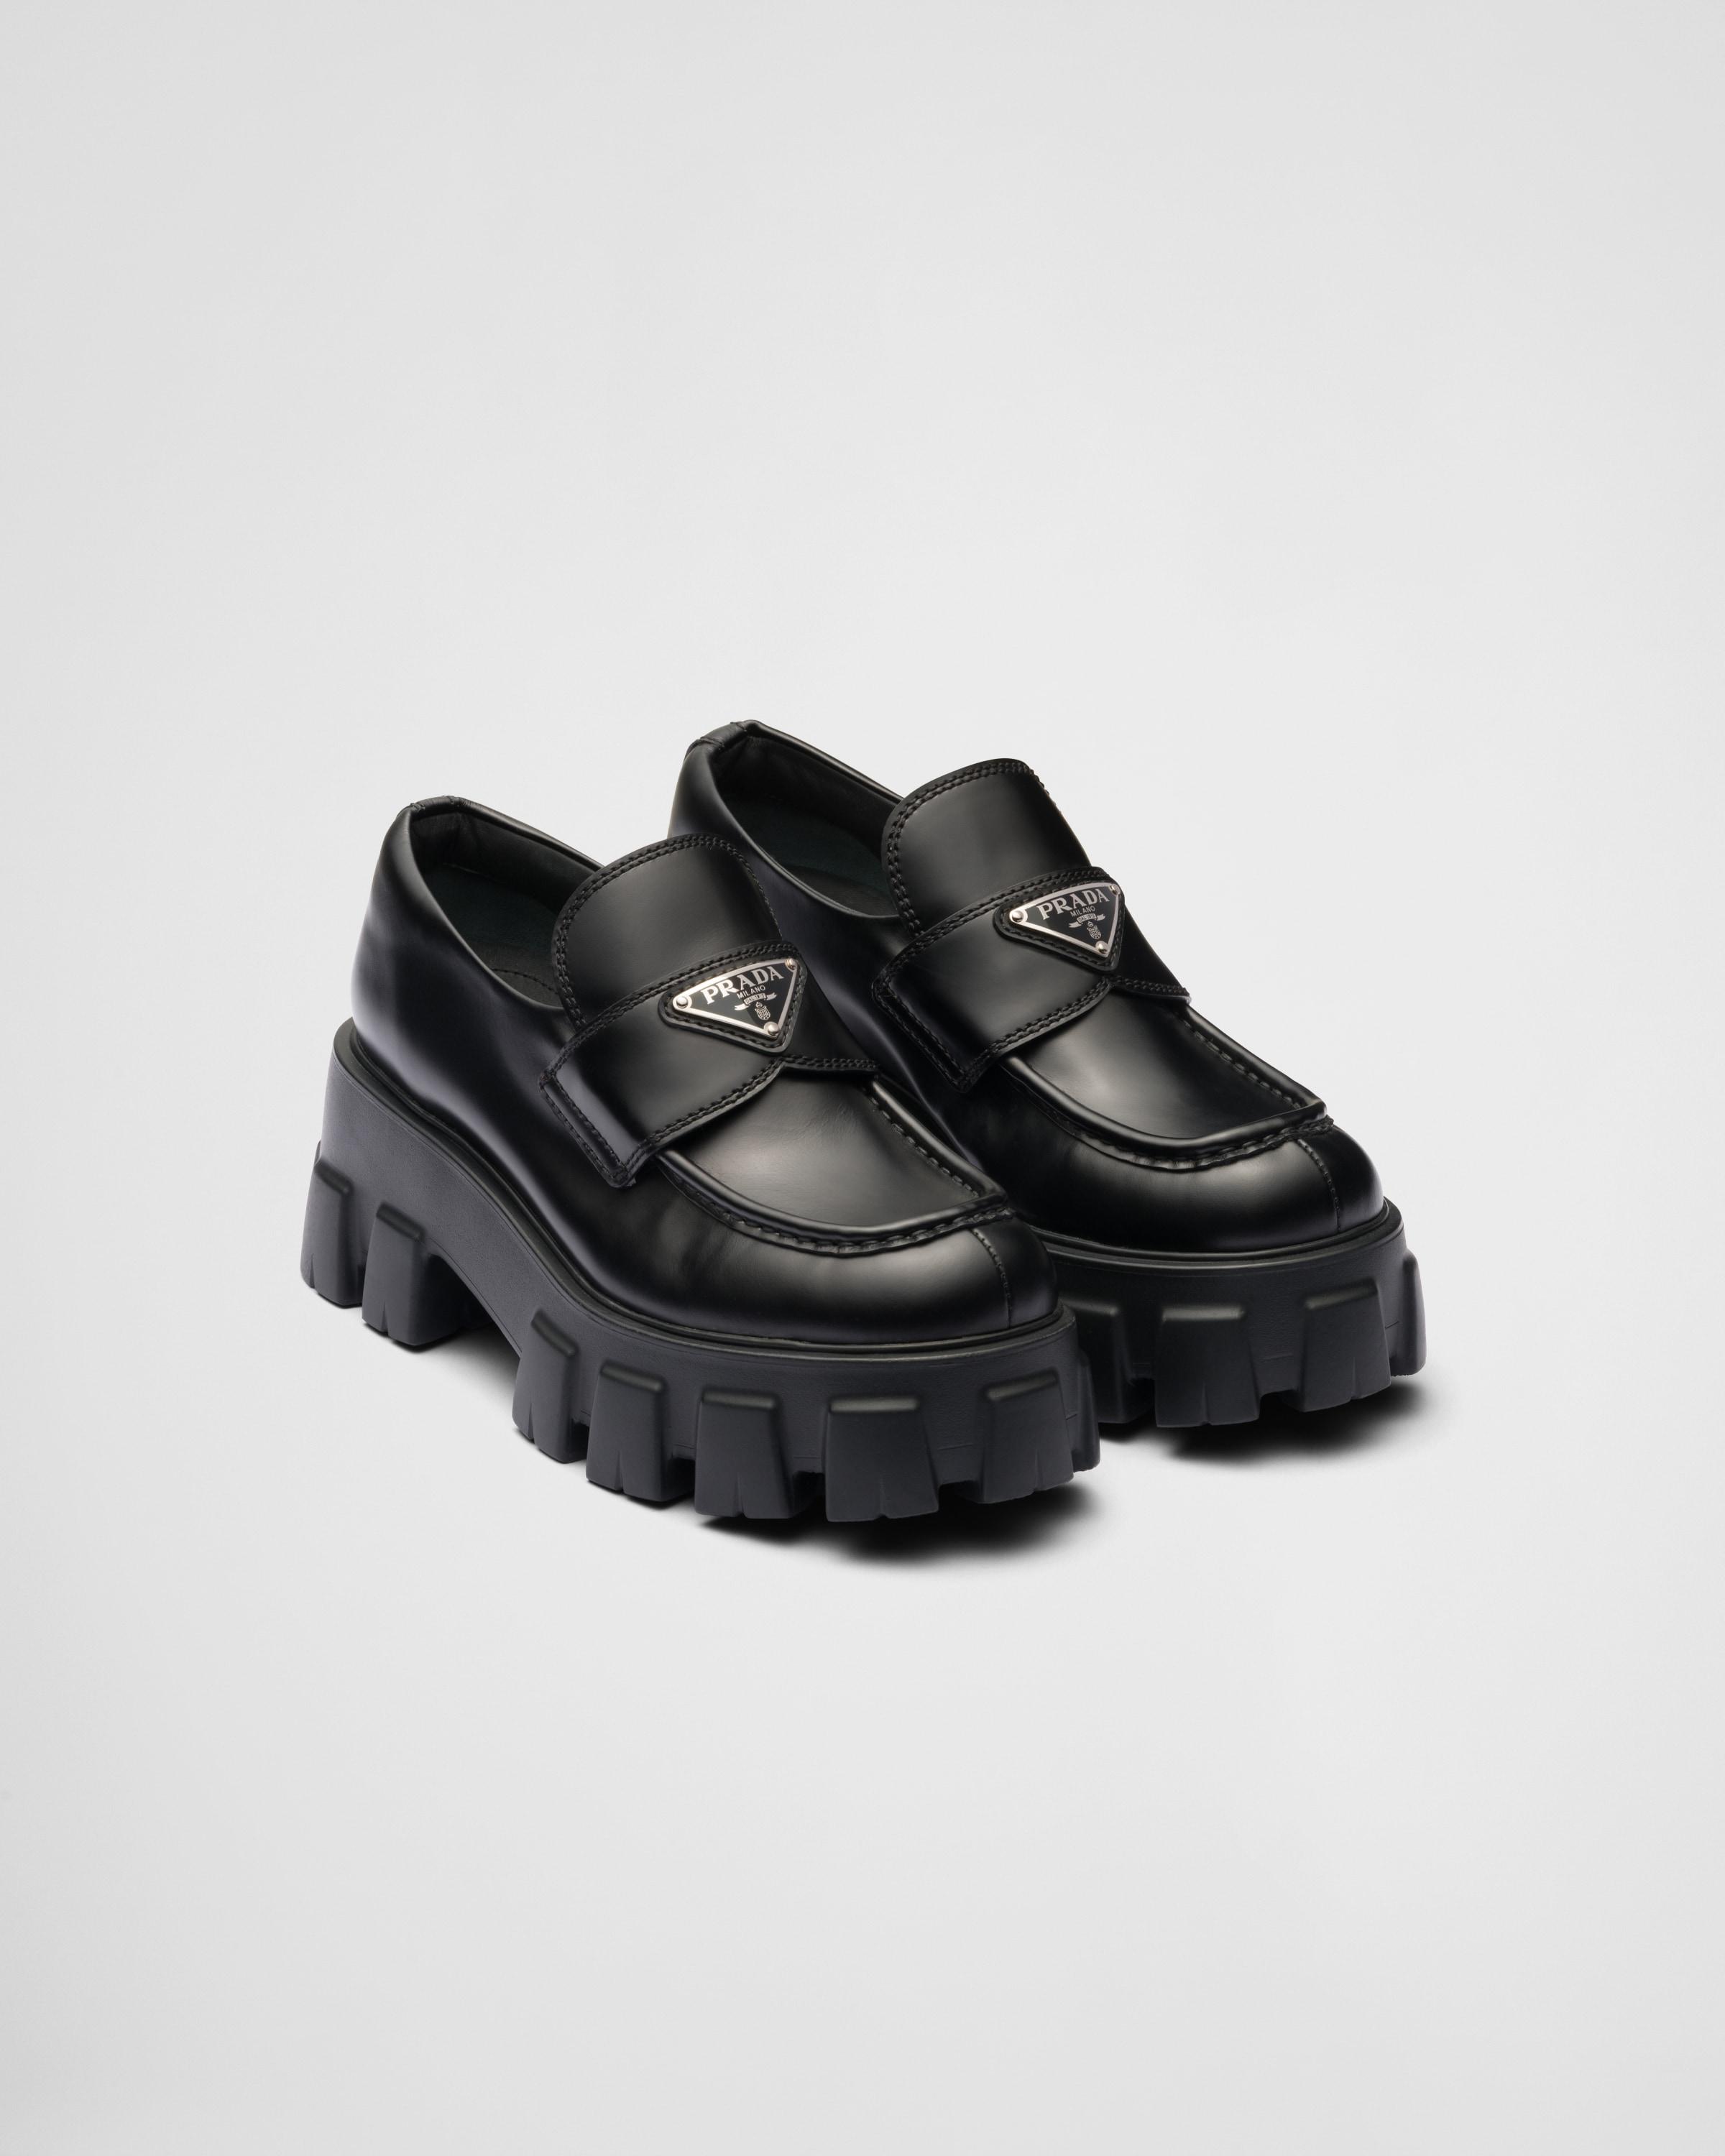 Prada Brushed Leather Monolith Loafers in Black | Lyst